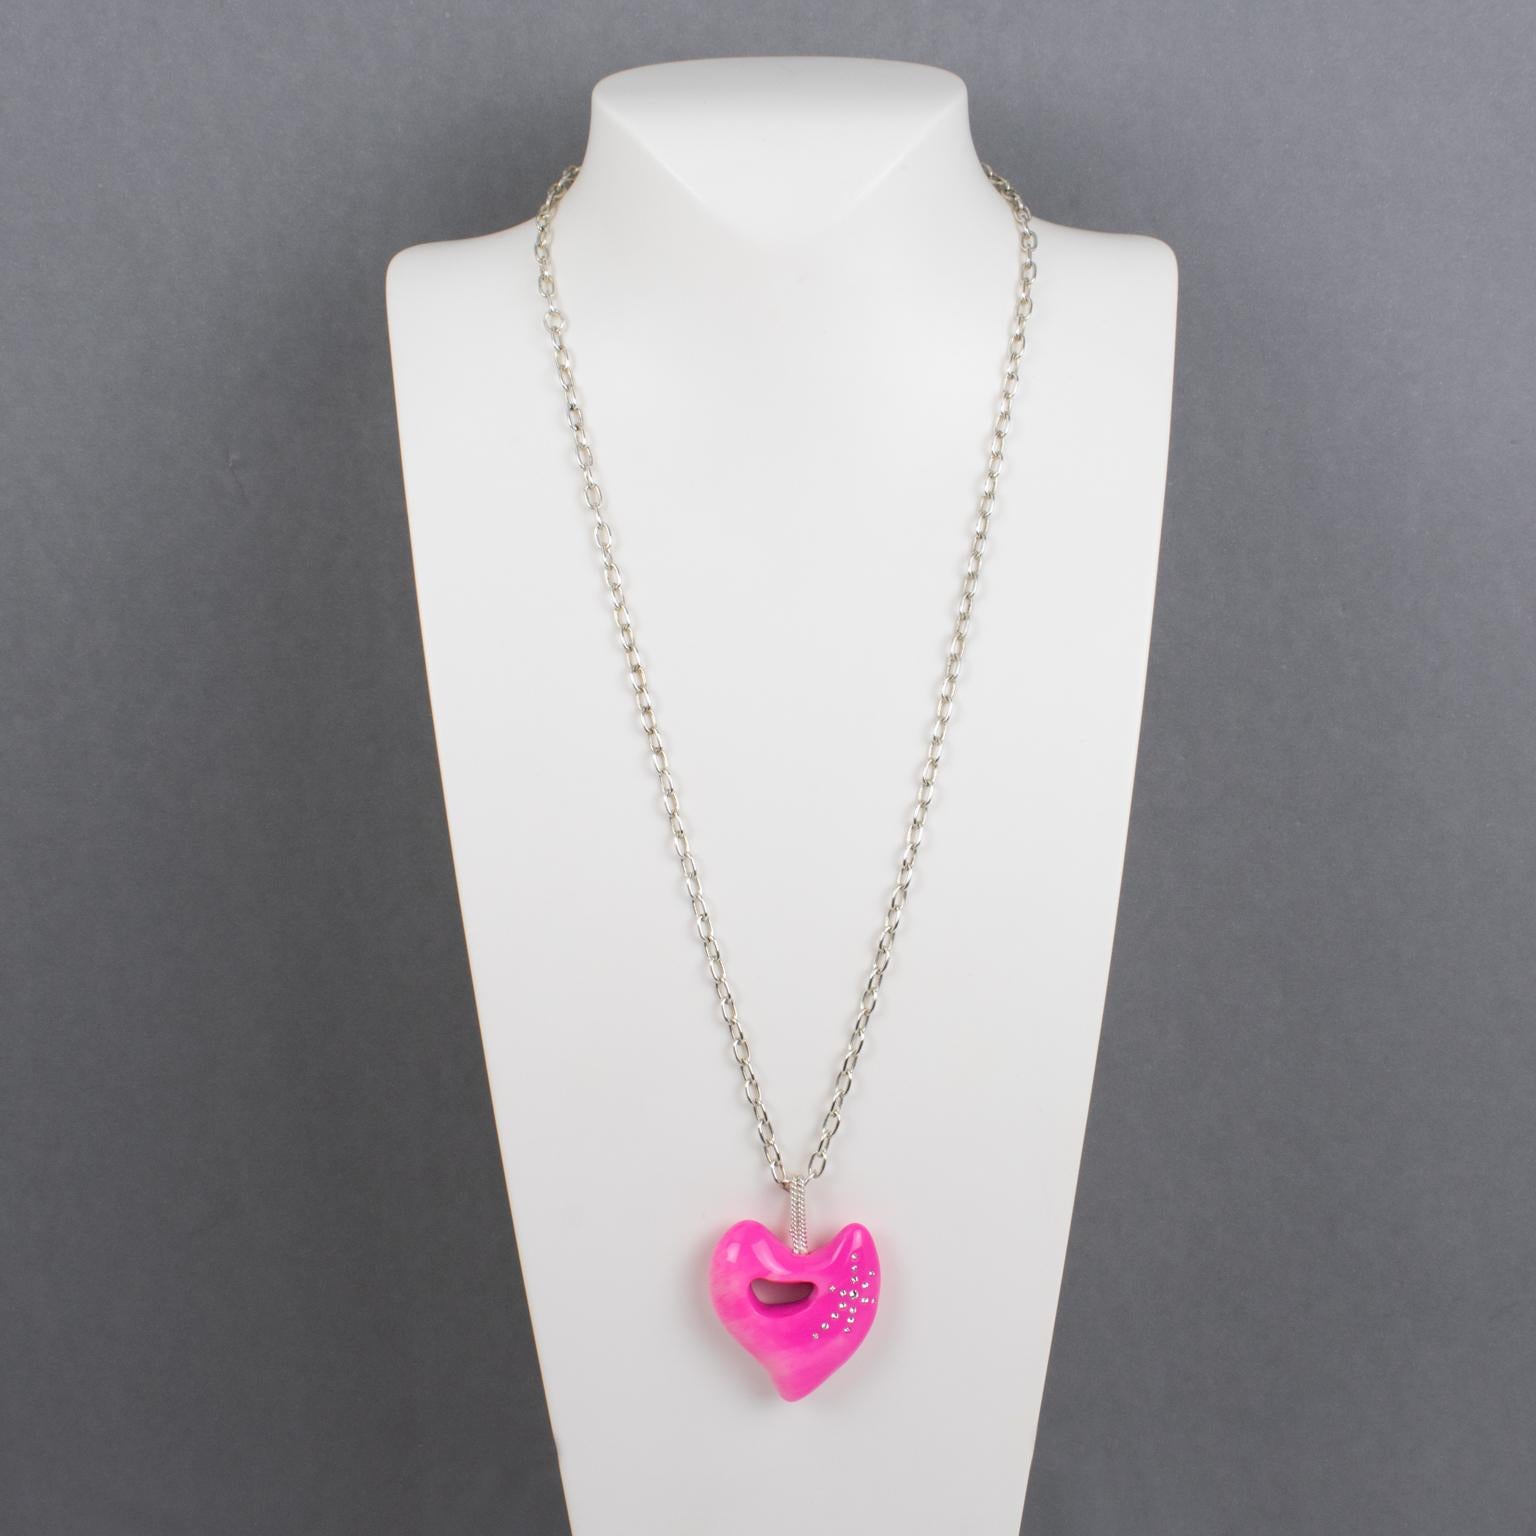 Christian Lacroix Silver Plate Chain Necklace with Hot Pink Resin Heart In Good Condition For Sale In Atlanta, GA